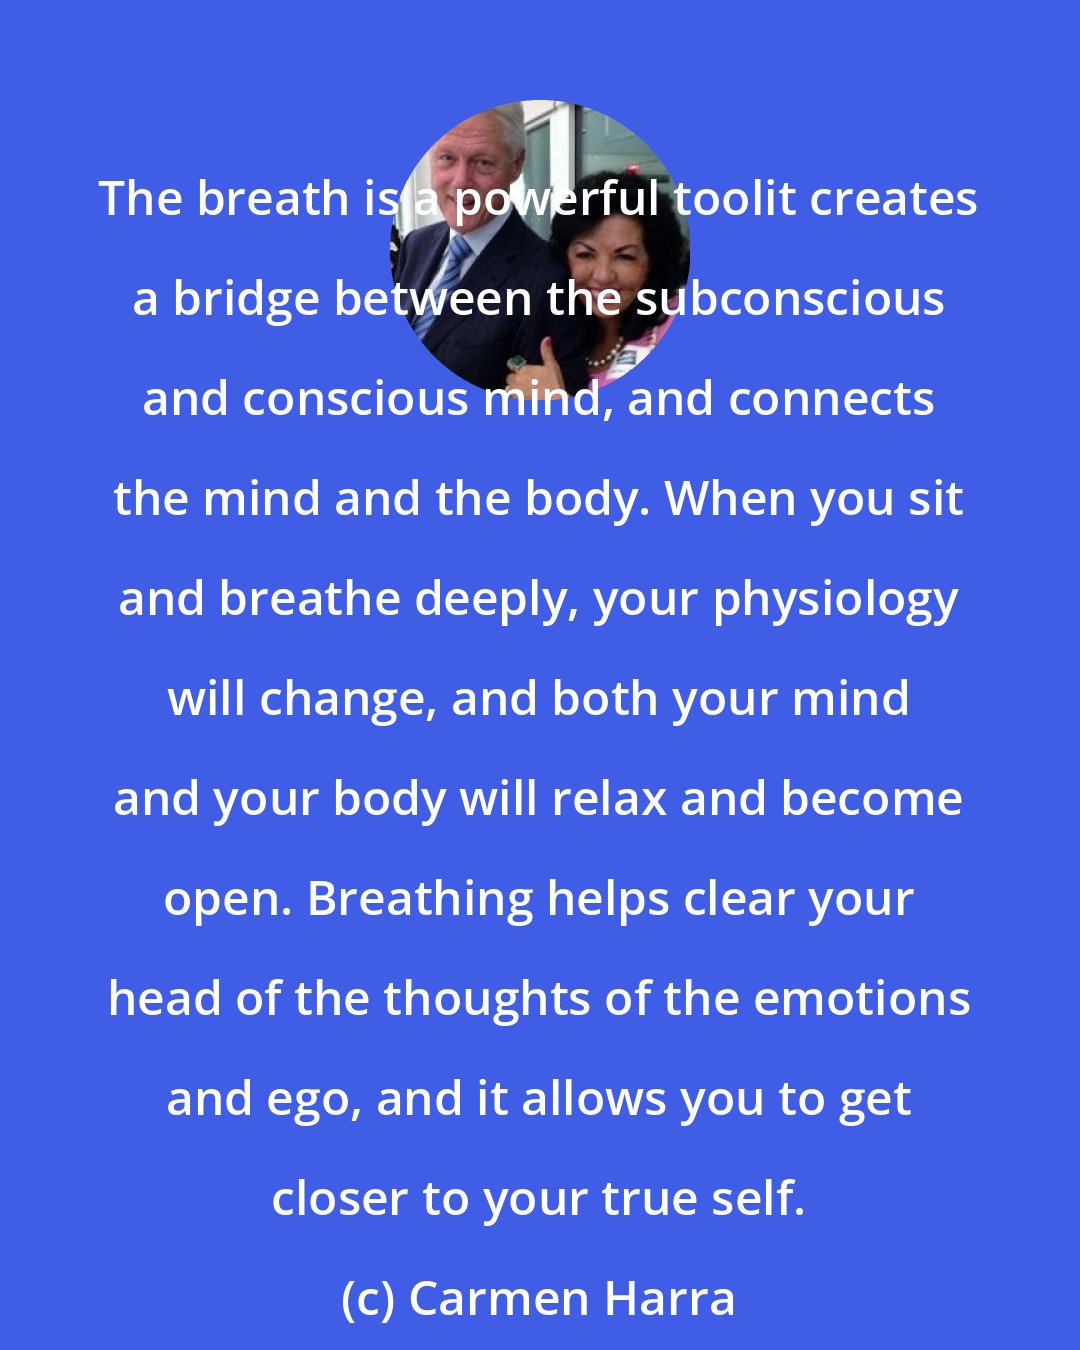 Carmen Harra: The breath is a powerful toolit creates a bridge between the subconscious and conscious mind, and connects the mind and the body. When you sit and breathe deeply, your physiology will change, and both your mind and your body will relax and become open. Breathing helps clear your head of the thoughts of the emotions and ego, and it allows you to get closer to your true self.